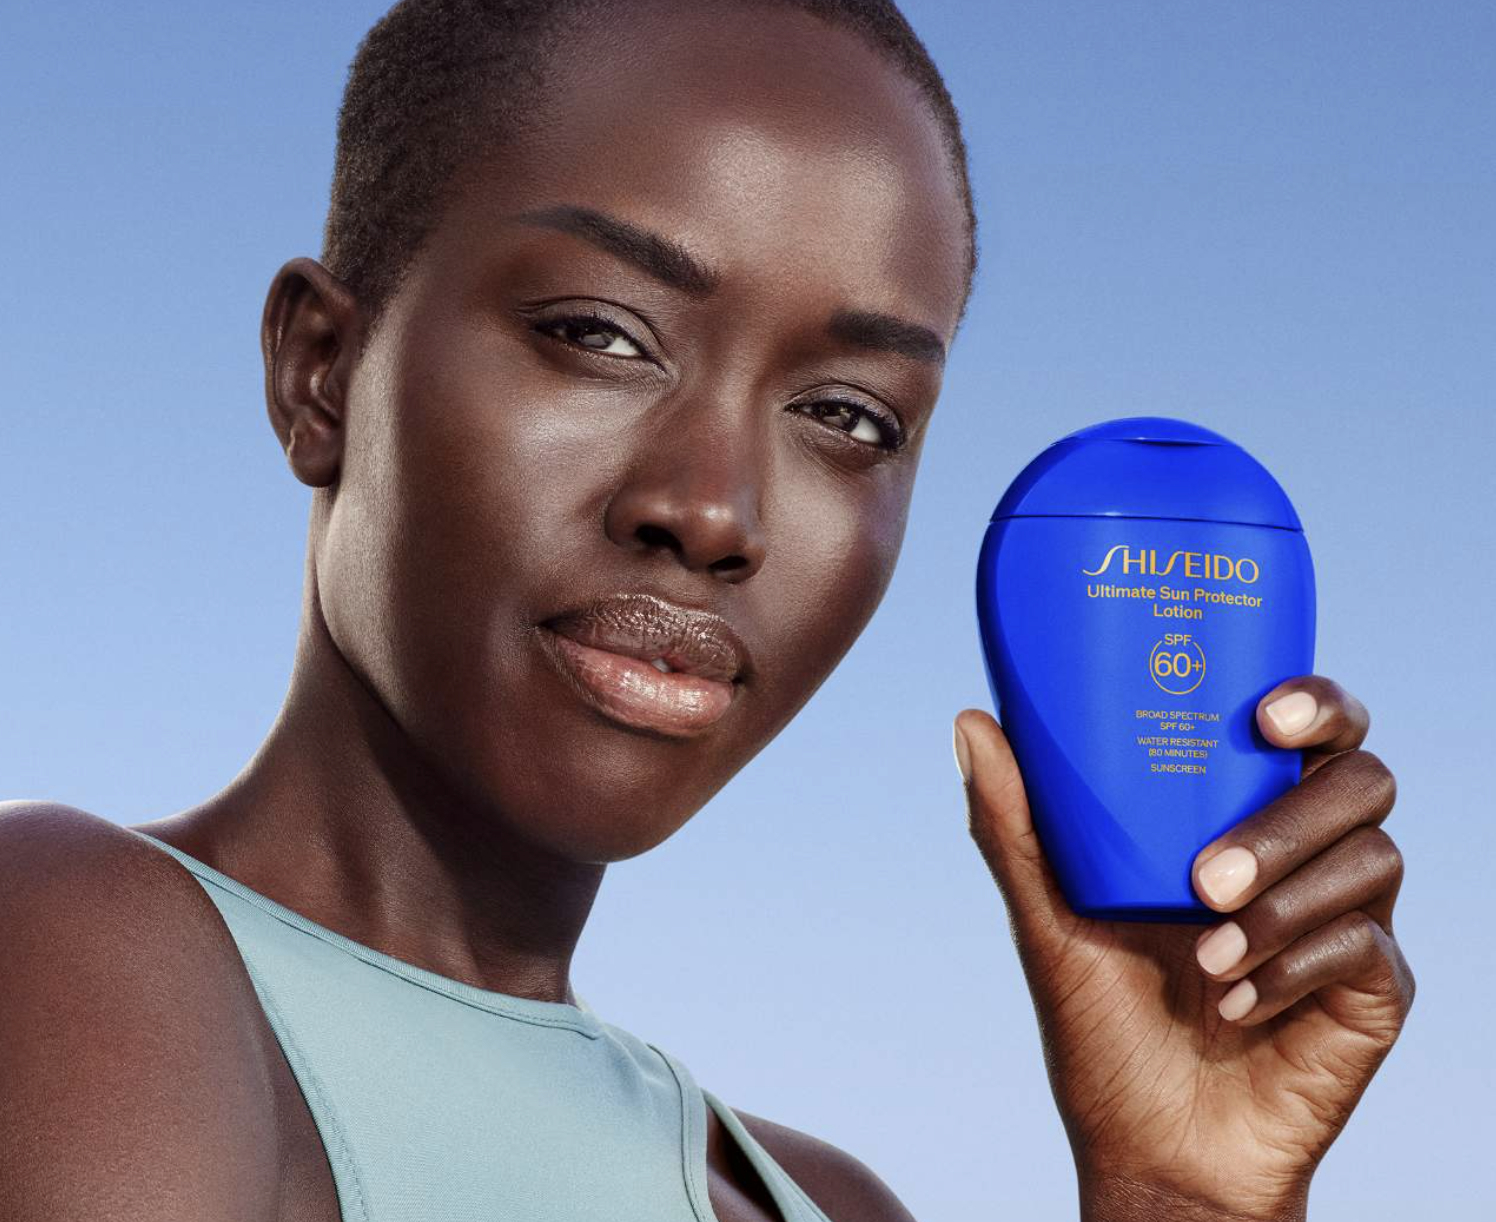 Woman holding Shiseido sunscreen product, looking at the camera, wearing a sleeveless top. Great for shopping skincare essentials